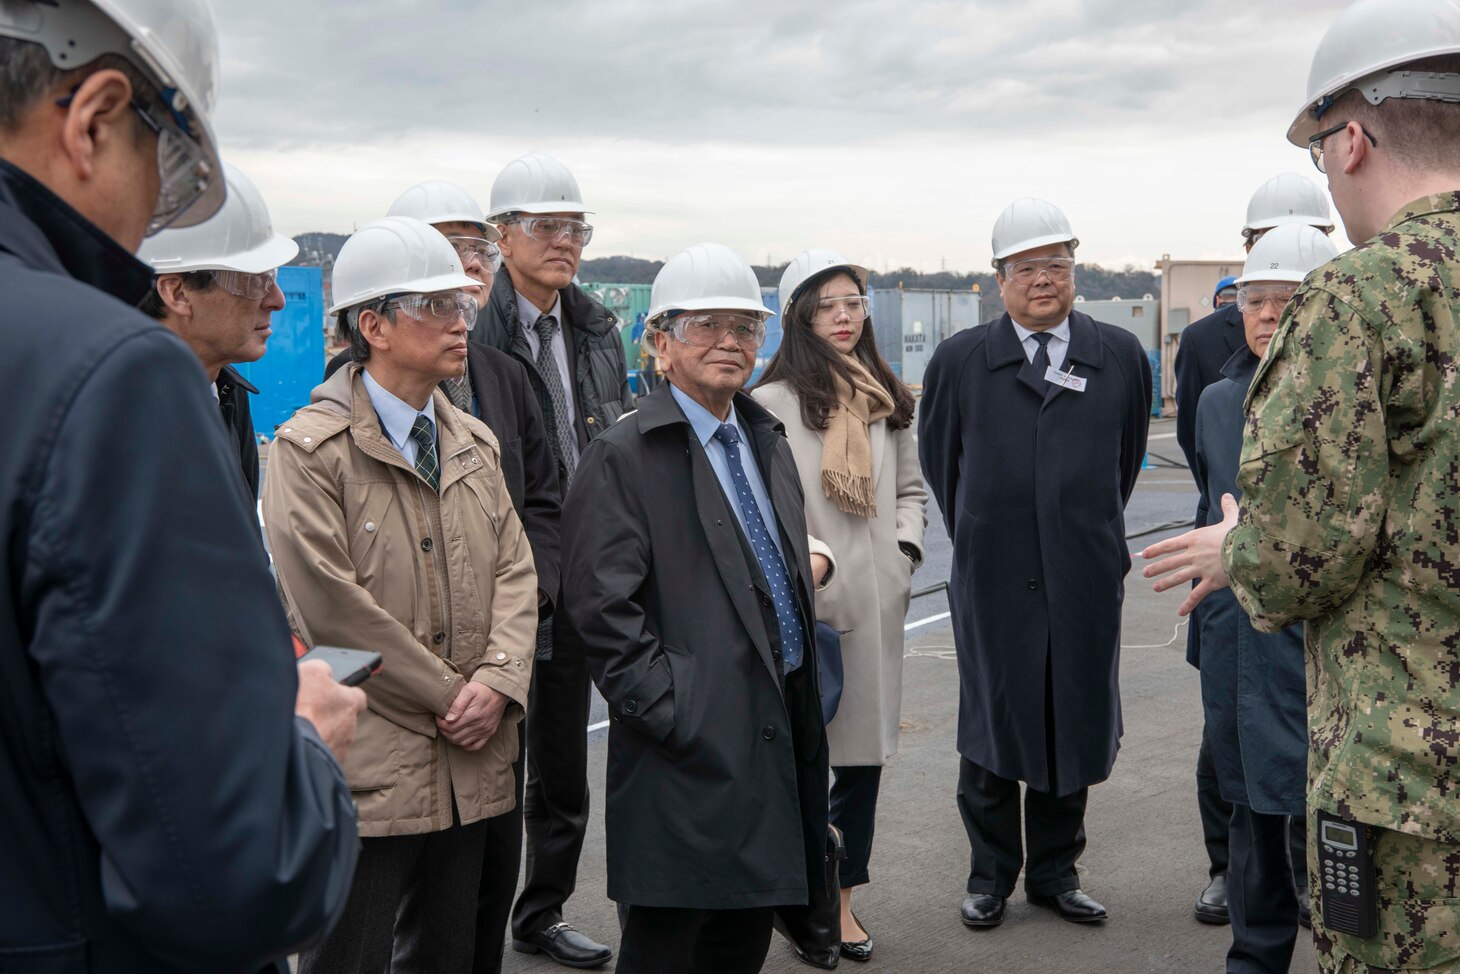 YOKOSUKA (Feb. 21, 2019) Chairman Masato Yasumoto, from Iwakuni Chamber of Commerce and Industry, tours aboard the Navy's forward-deployed aircraft carrier, USS Ronald Reagan (CVN 76). Ronald Reagan, the flagship of Carrier Strike Group 5, provides a combat-ready force that protects and defends the collective maritime interests of its allies and partners in the Indo-Pacific region.